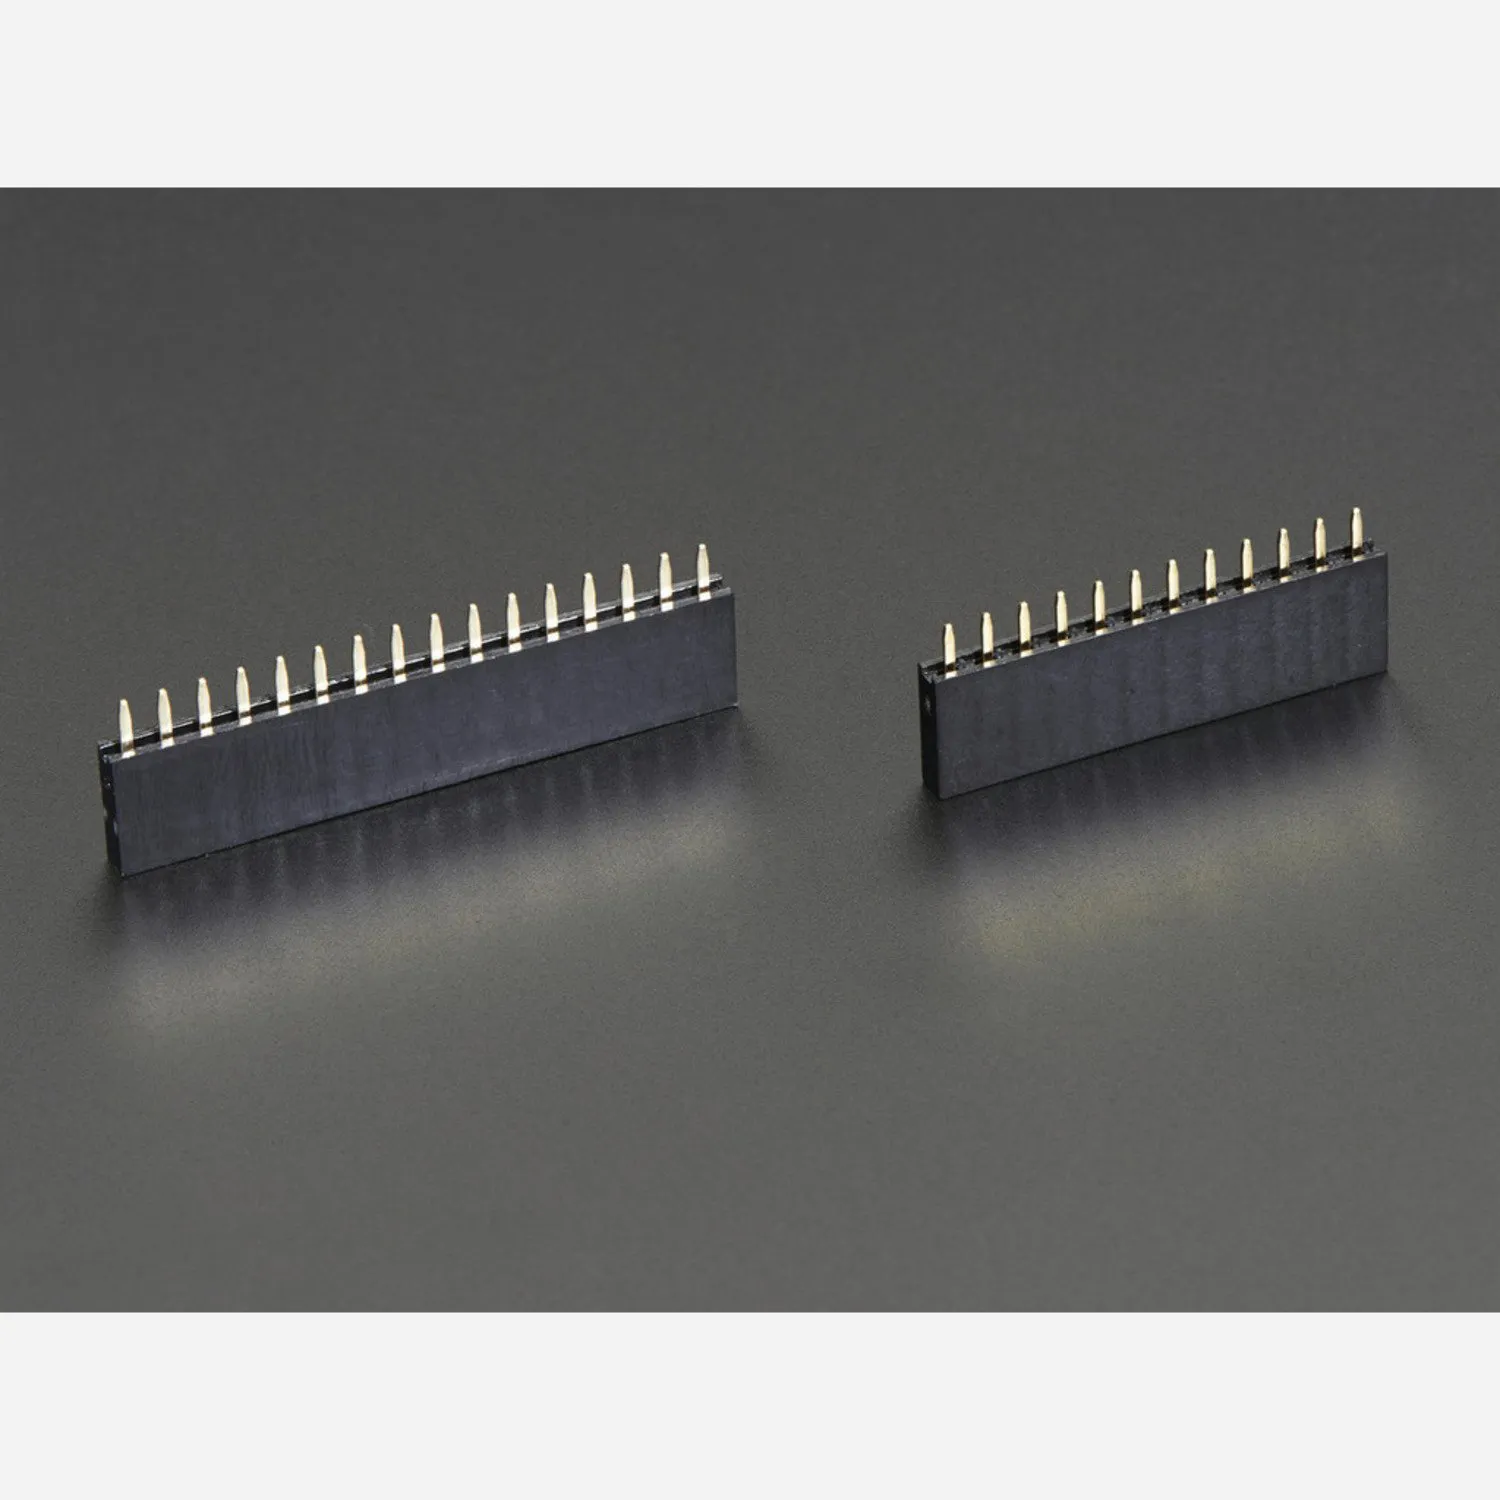 Photo of Feather Header Kit - 12-pin and 16-pin Female Header Set